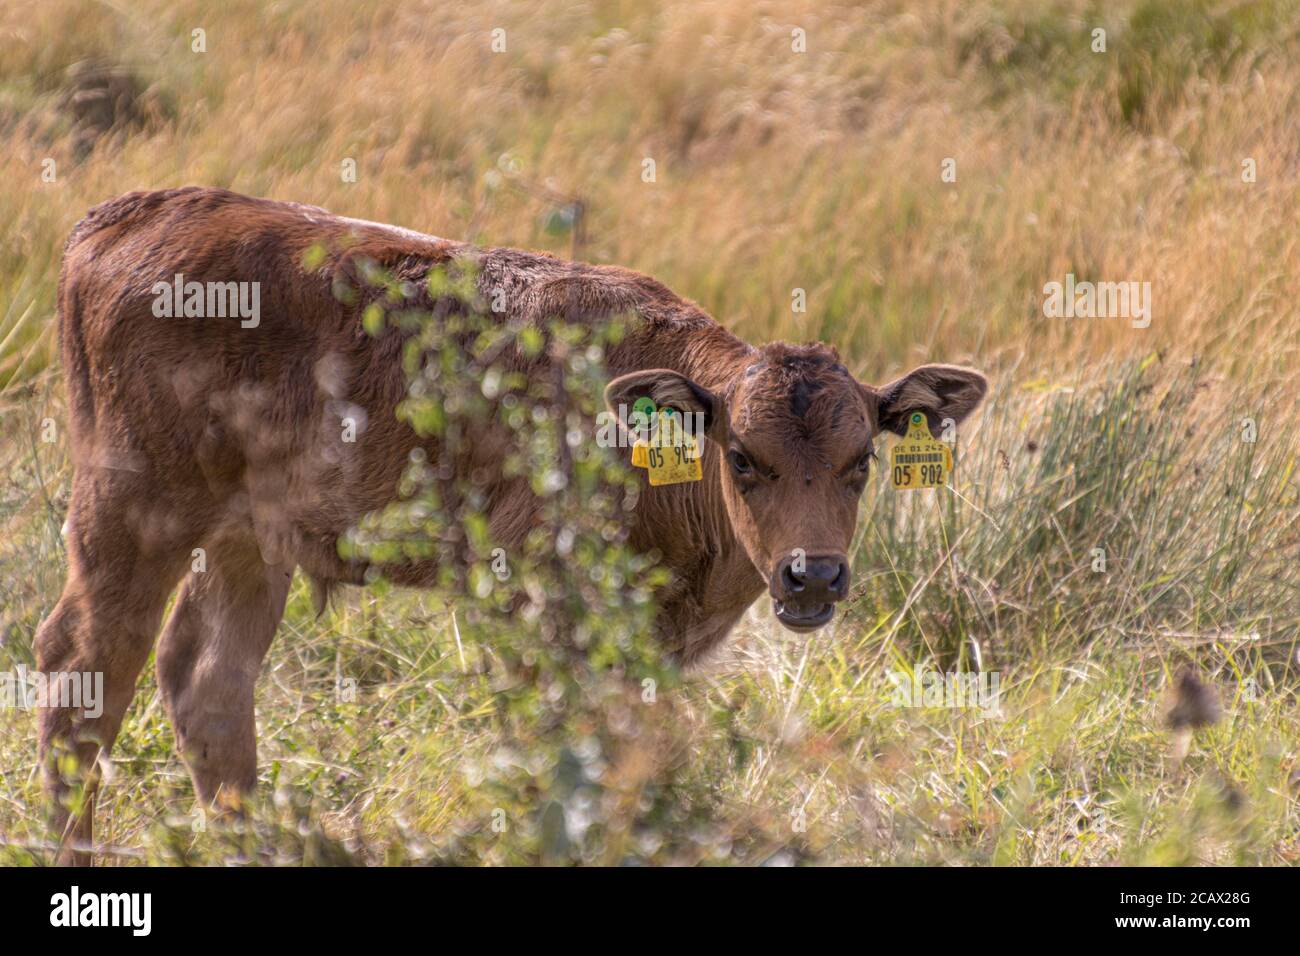 A brown calf is chewing grass in a field of high grass, while looking at the camera. Royalty free stock photo. Stock Photo